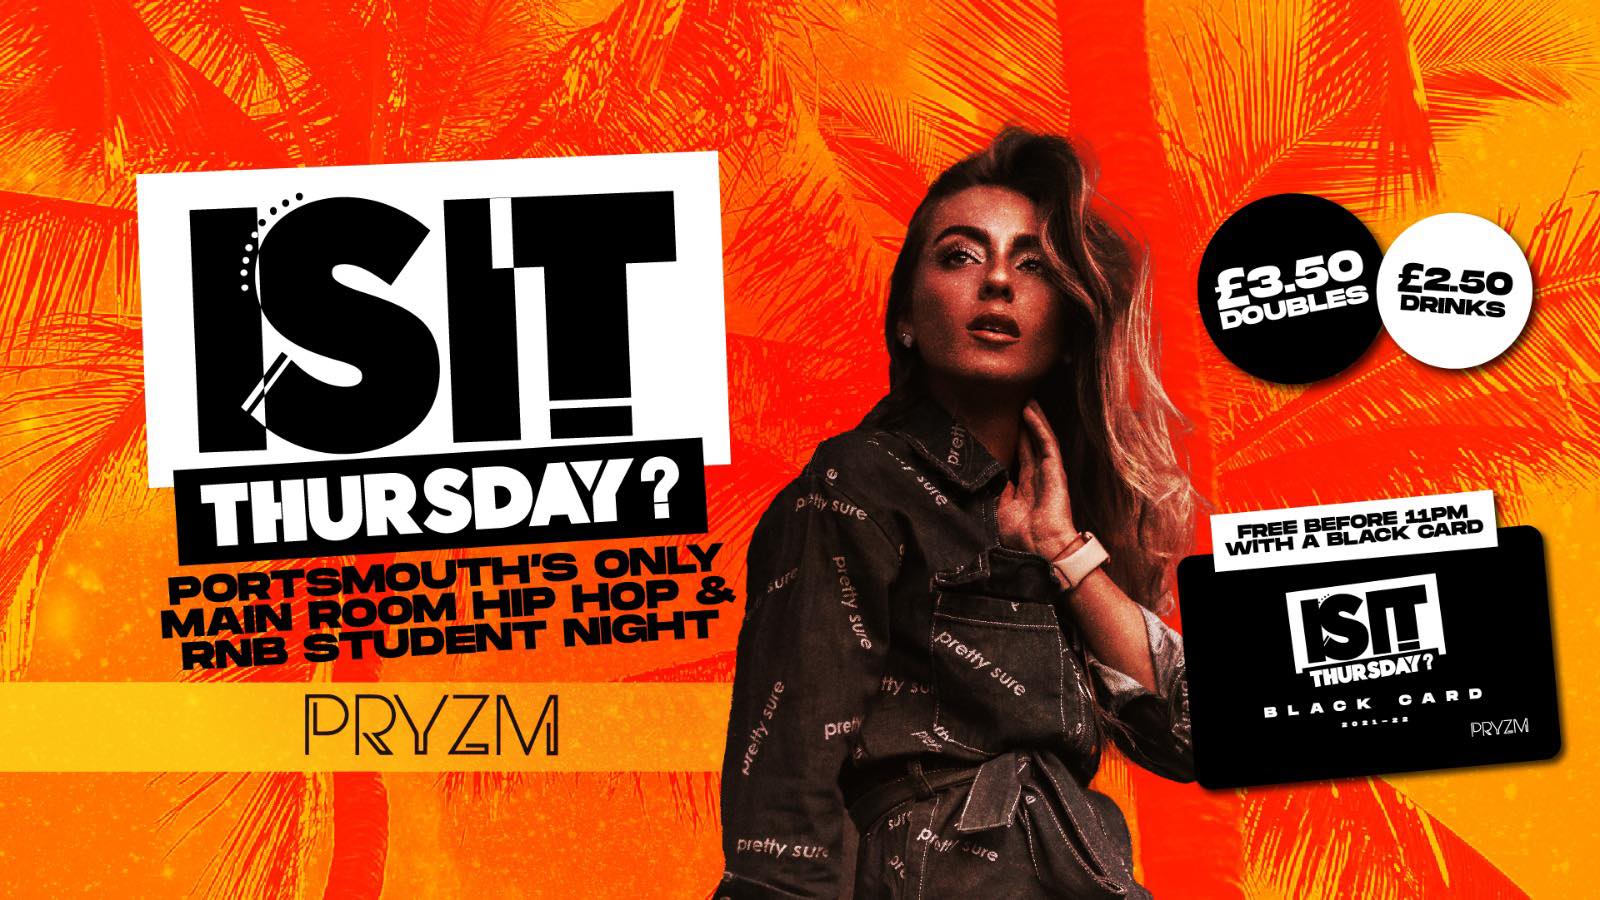 IS IT THURSDAY?! Portsmouth’s Biggest Student Night!